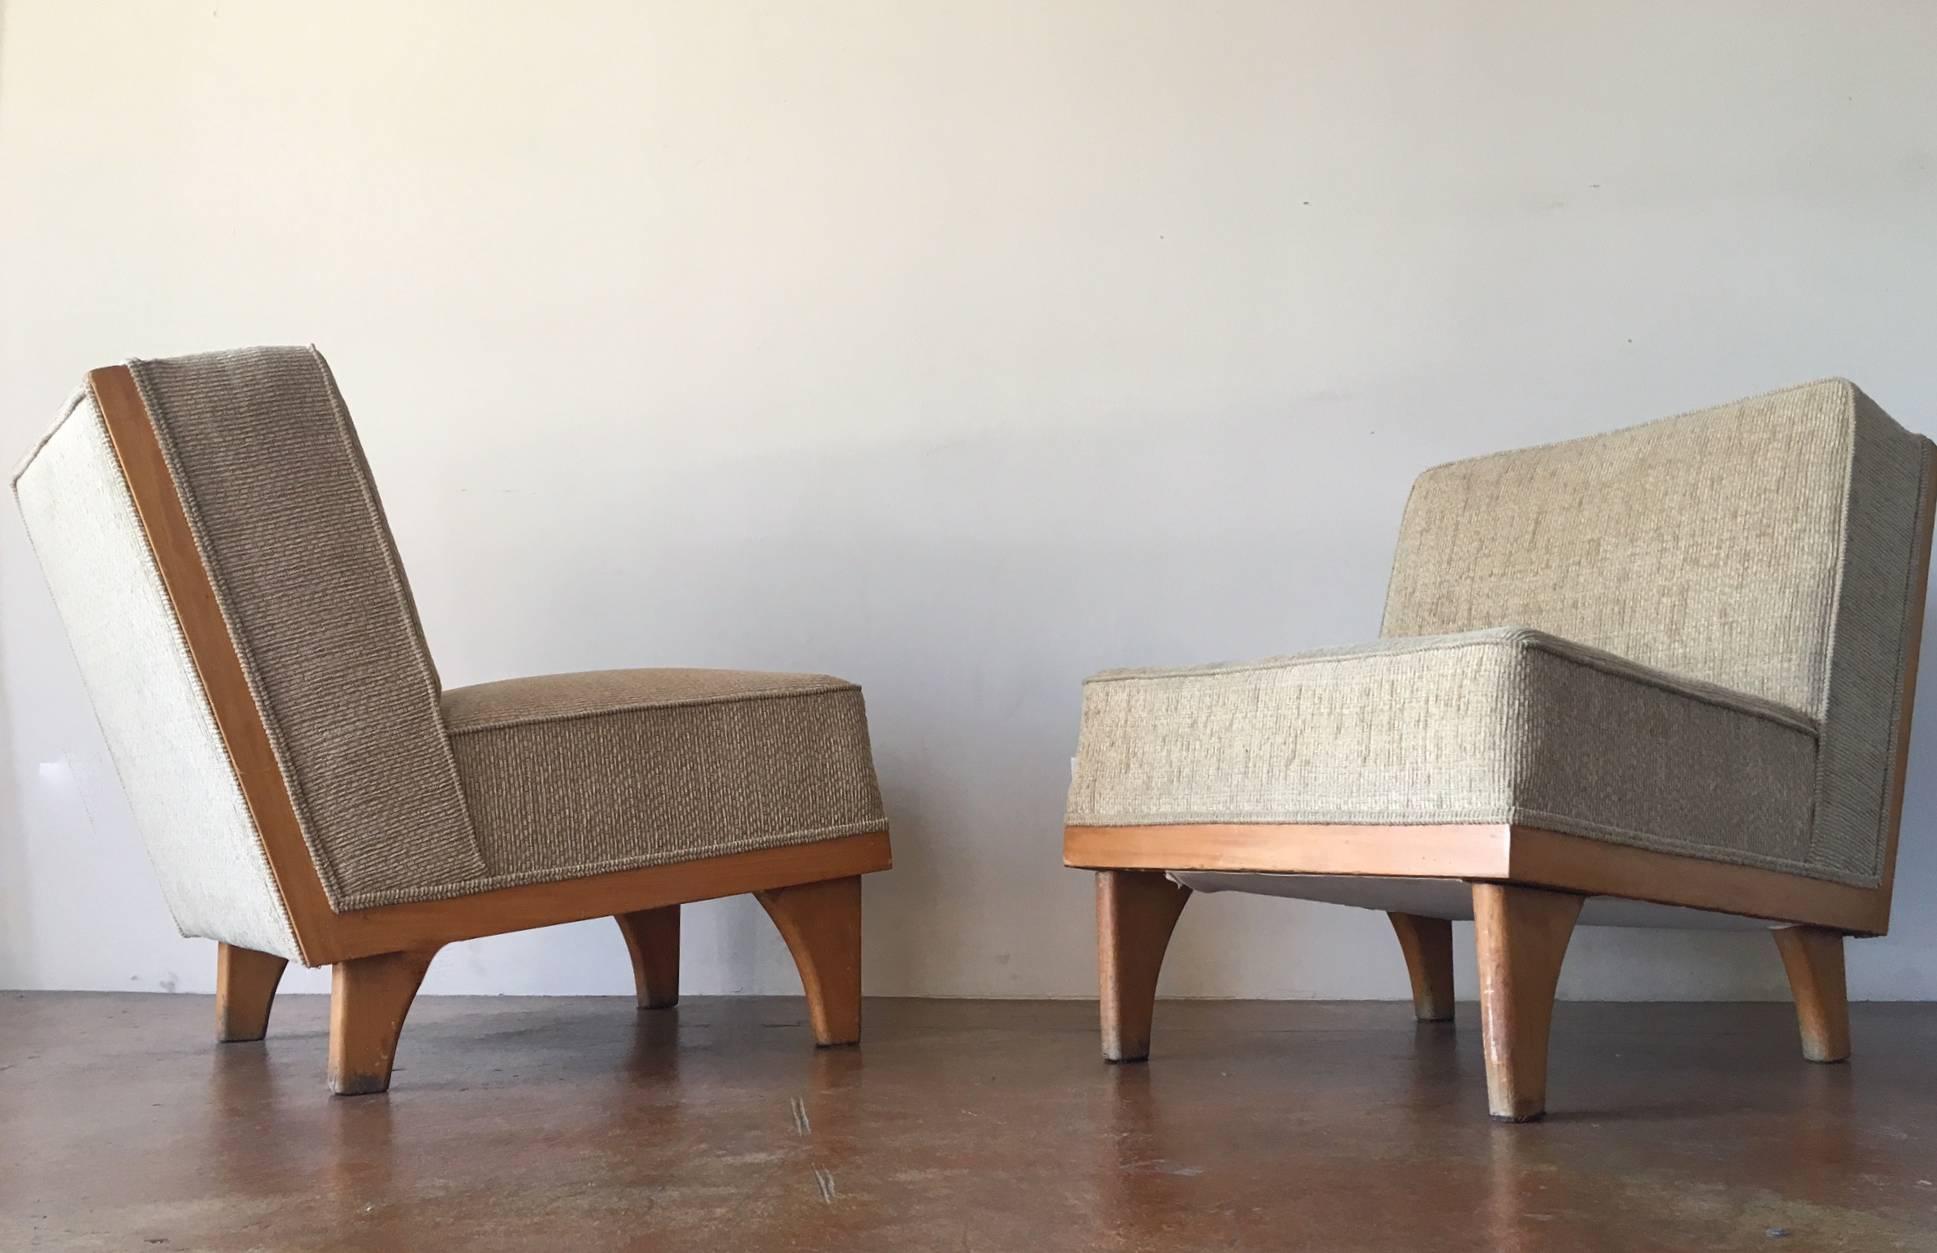 Very rare set of two lounge chairs, designed by Michael van Beuren for Domus, Mexico.
Mexico City, circa 1950s. 
Born in New York City, Van Beuren (1911-2004) studied at the influential Bauhaus School in Germany in the early 1930s, settling in